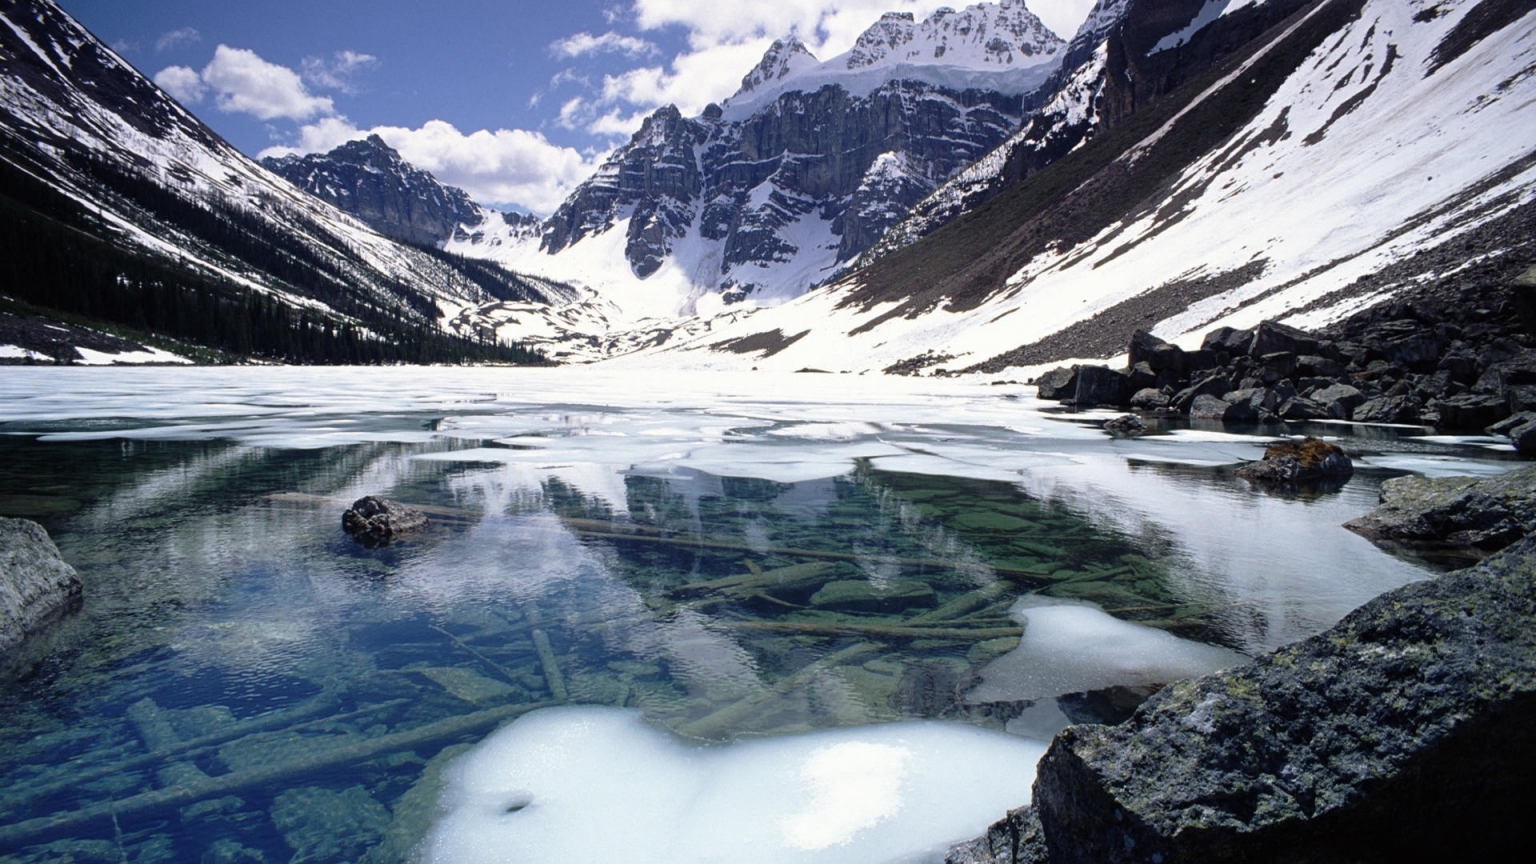 Amazing Lake and Mountain during Winter for 1536 x 864 HDTV resolution